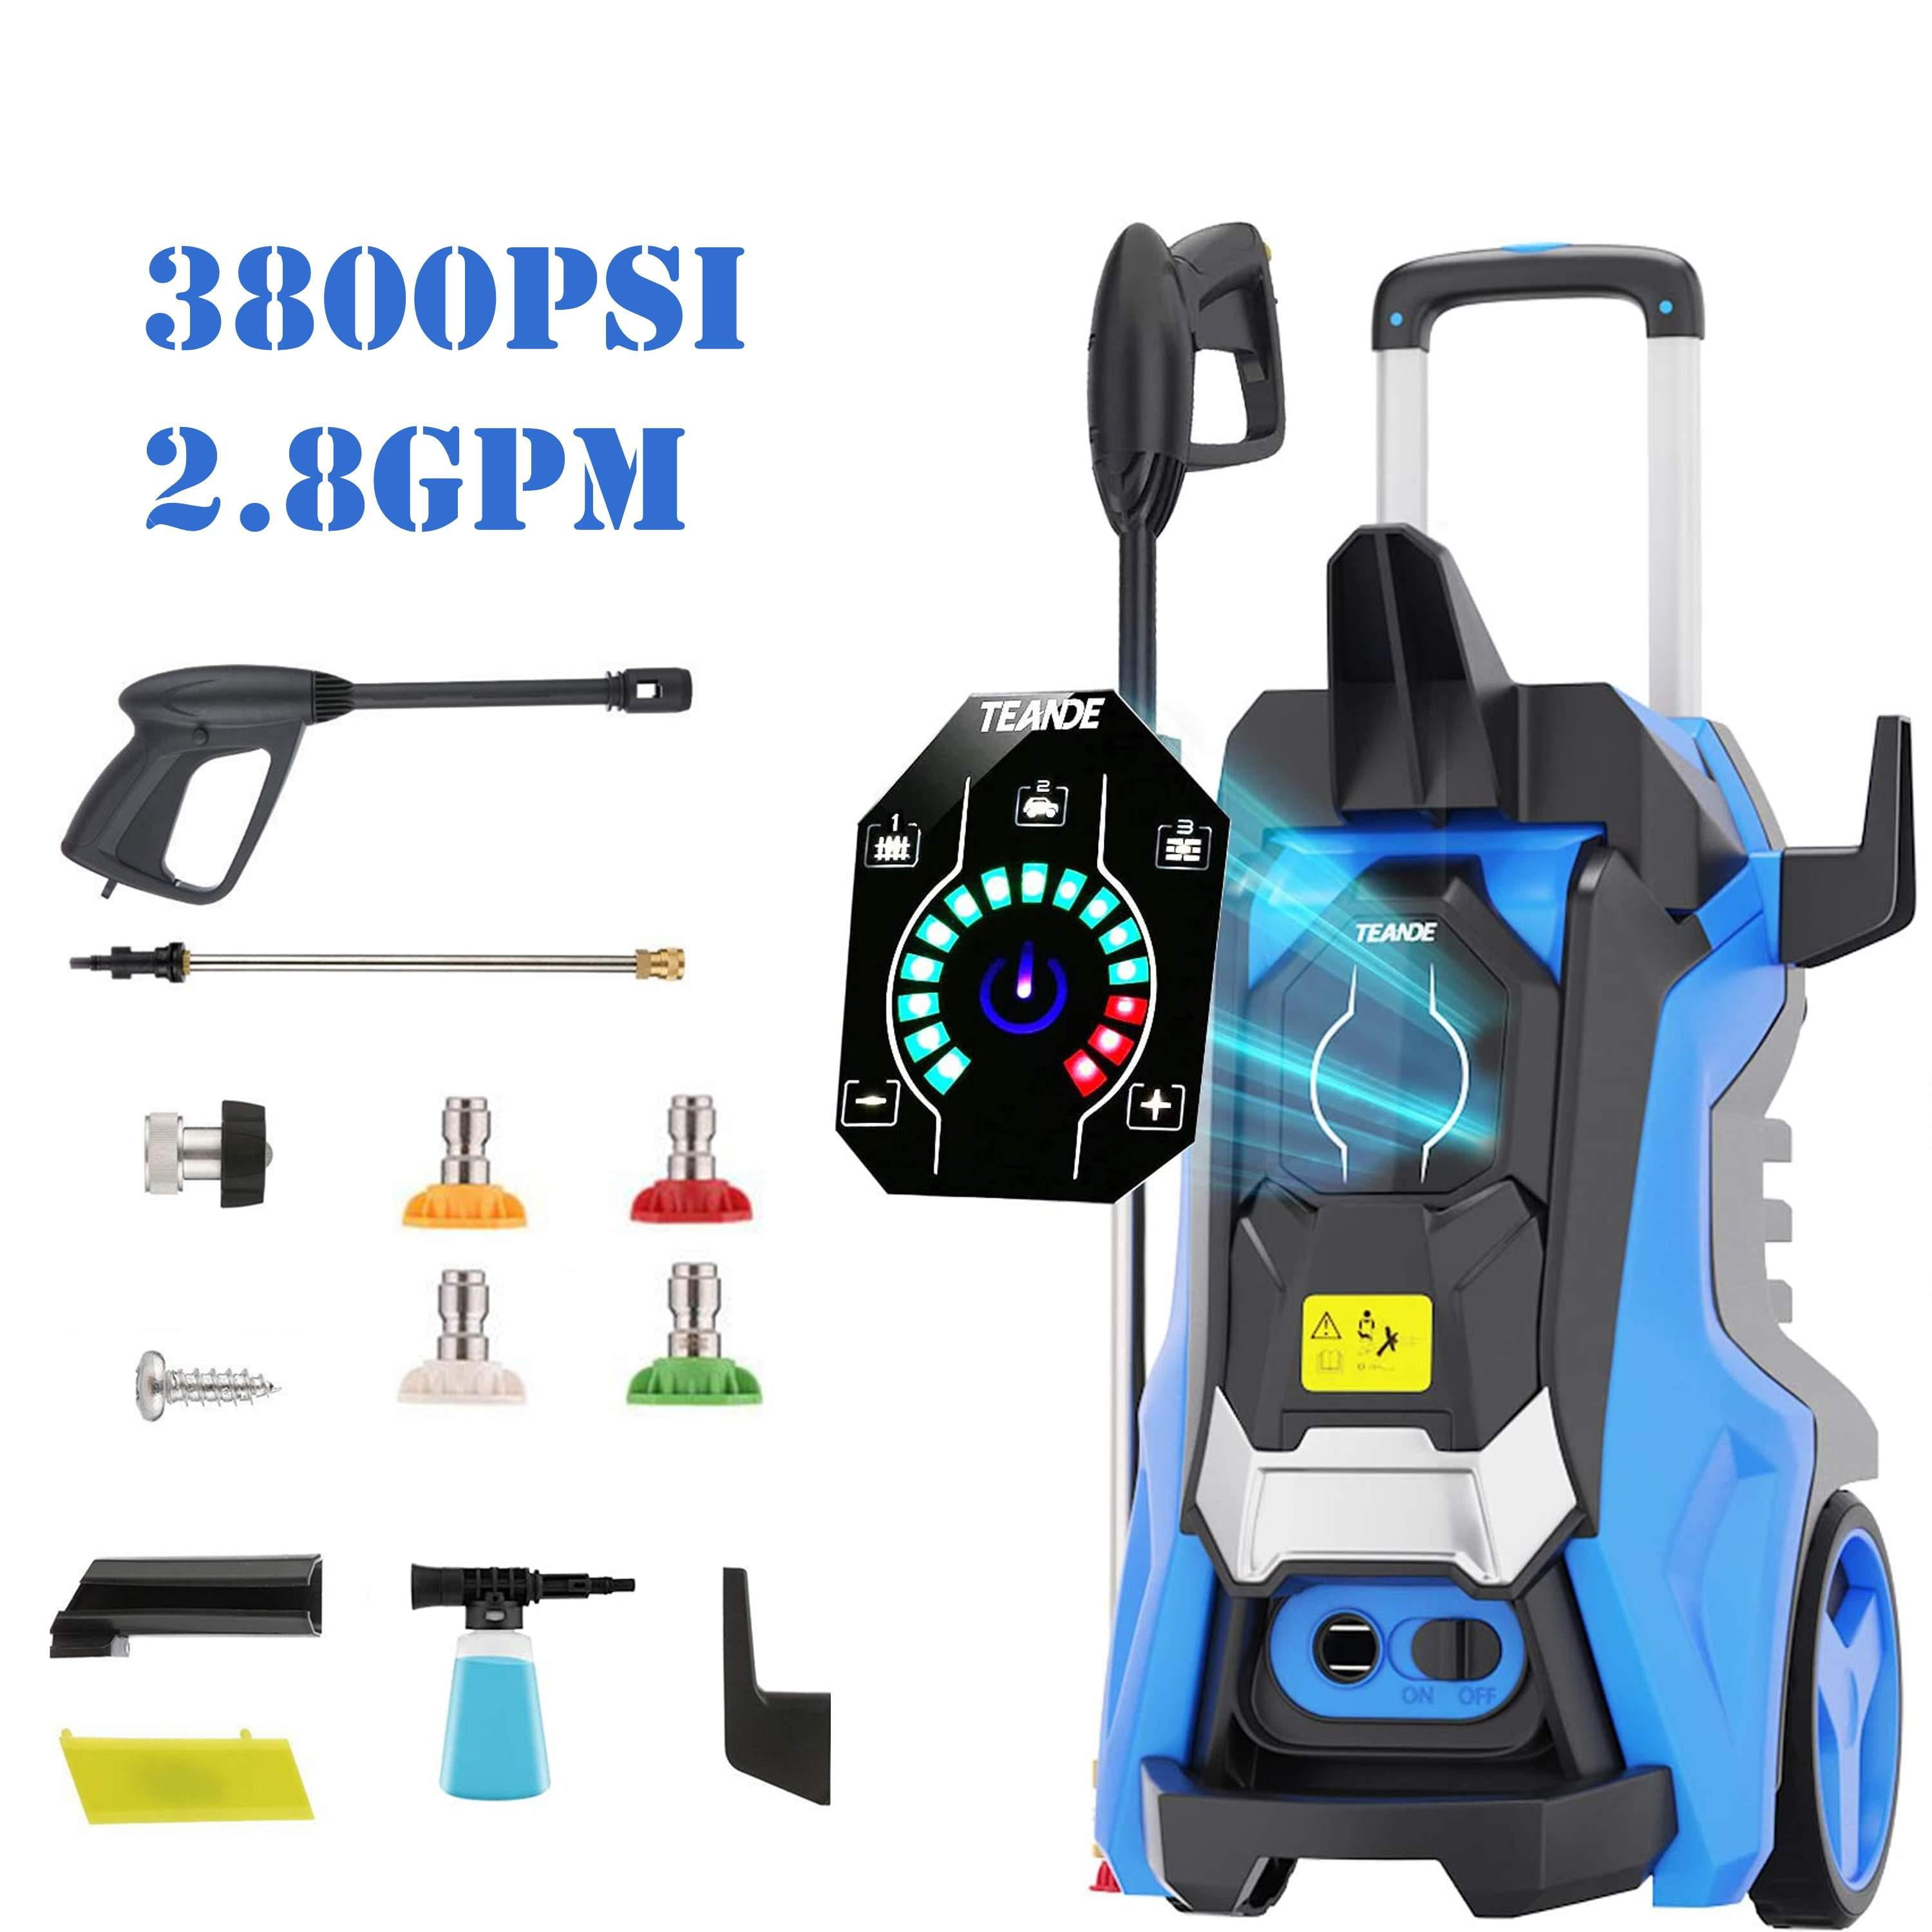 Details about   3800PSI 2.8GPM Electric Pressure Washer High Power Pressure Cleaner Sprayer!! 